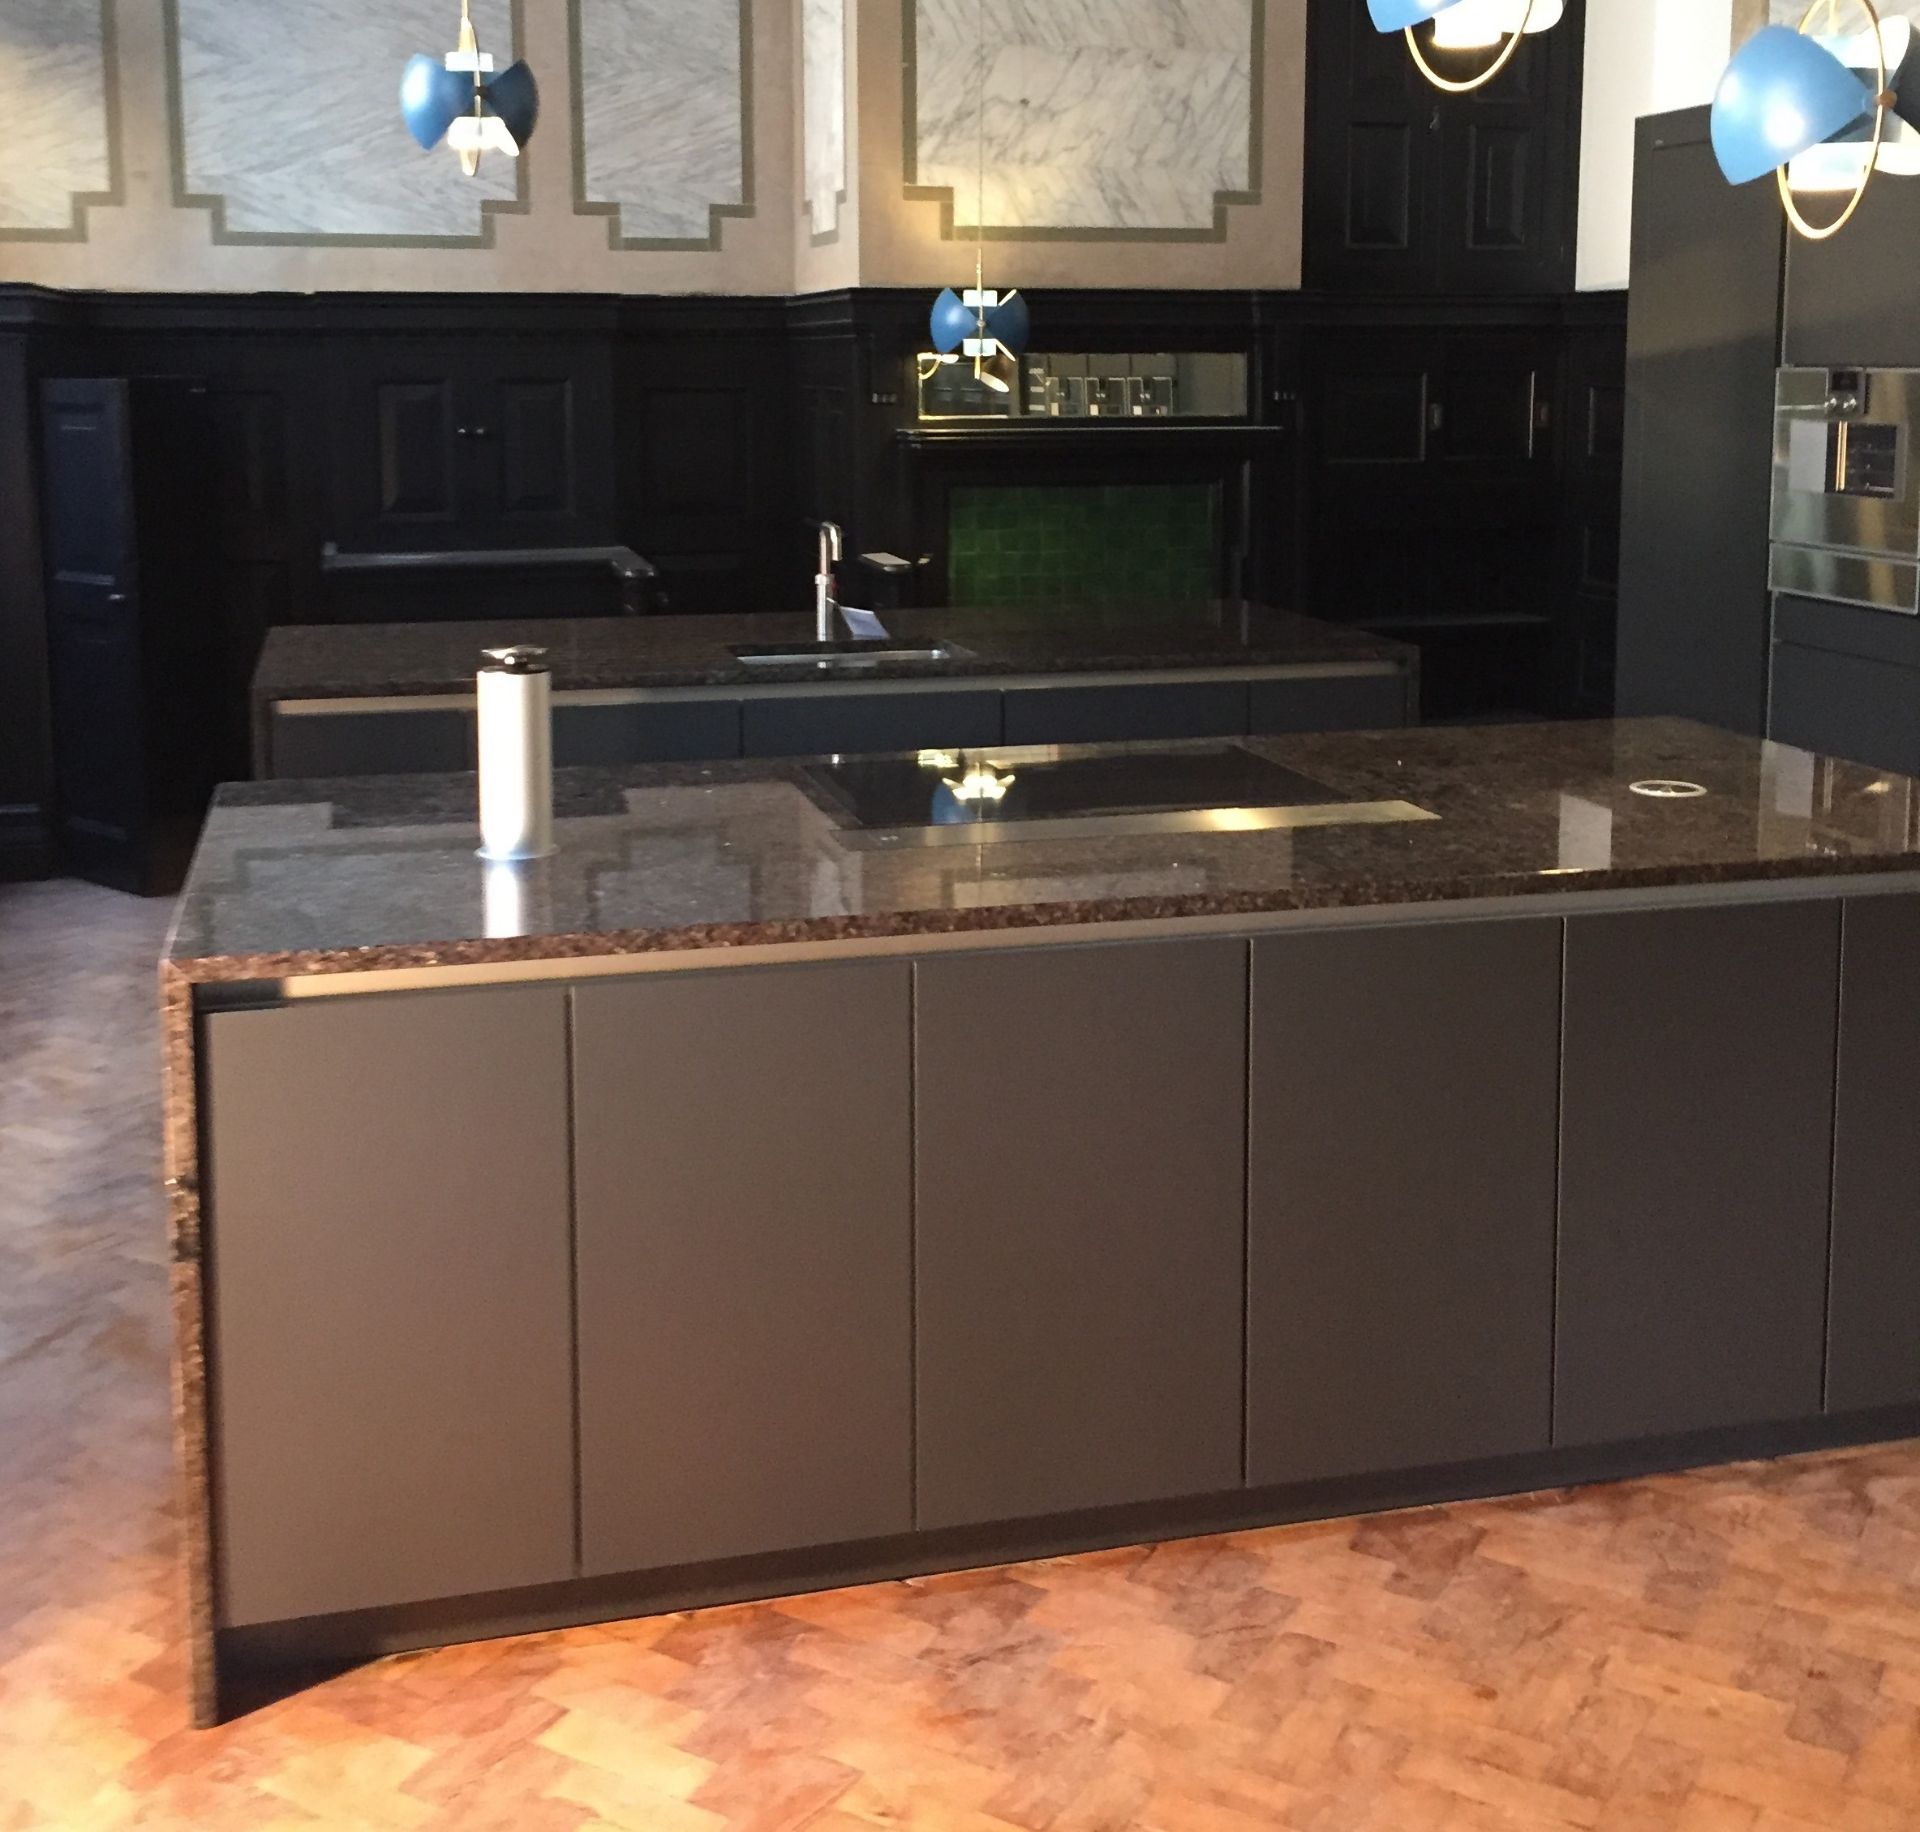 1 x SieMatic Fitted Kitchen in Basalt Grey Matt With Handleless Doors - Features Gaggenau - Image 4 of 10